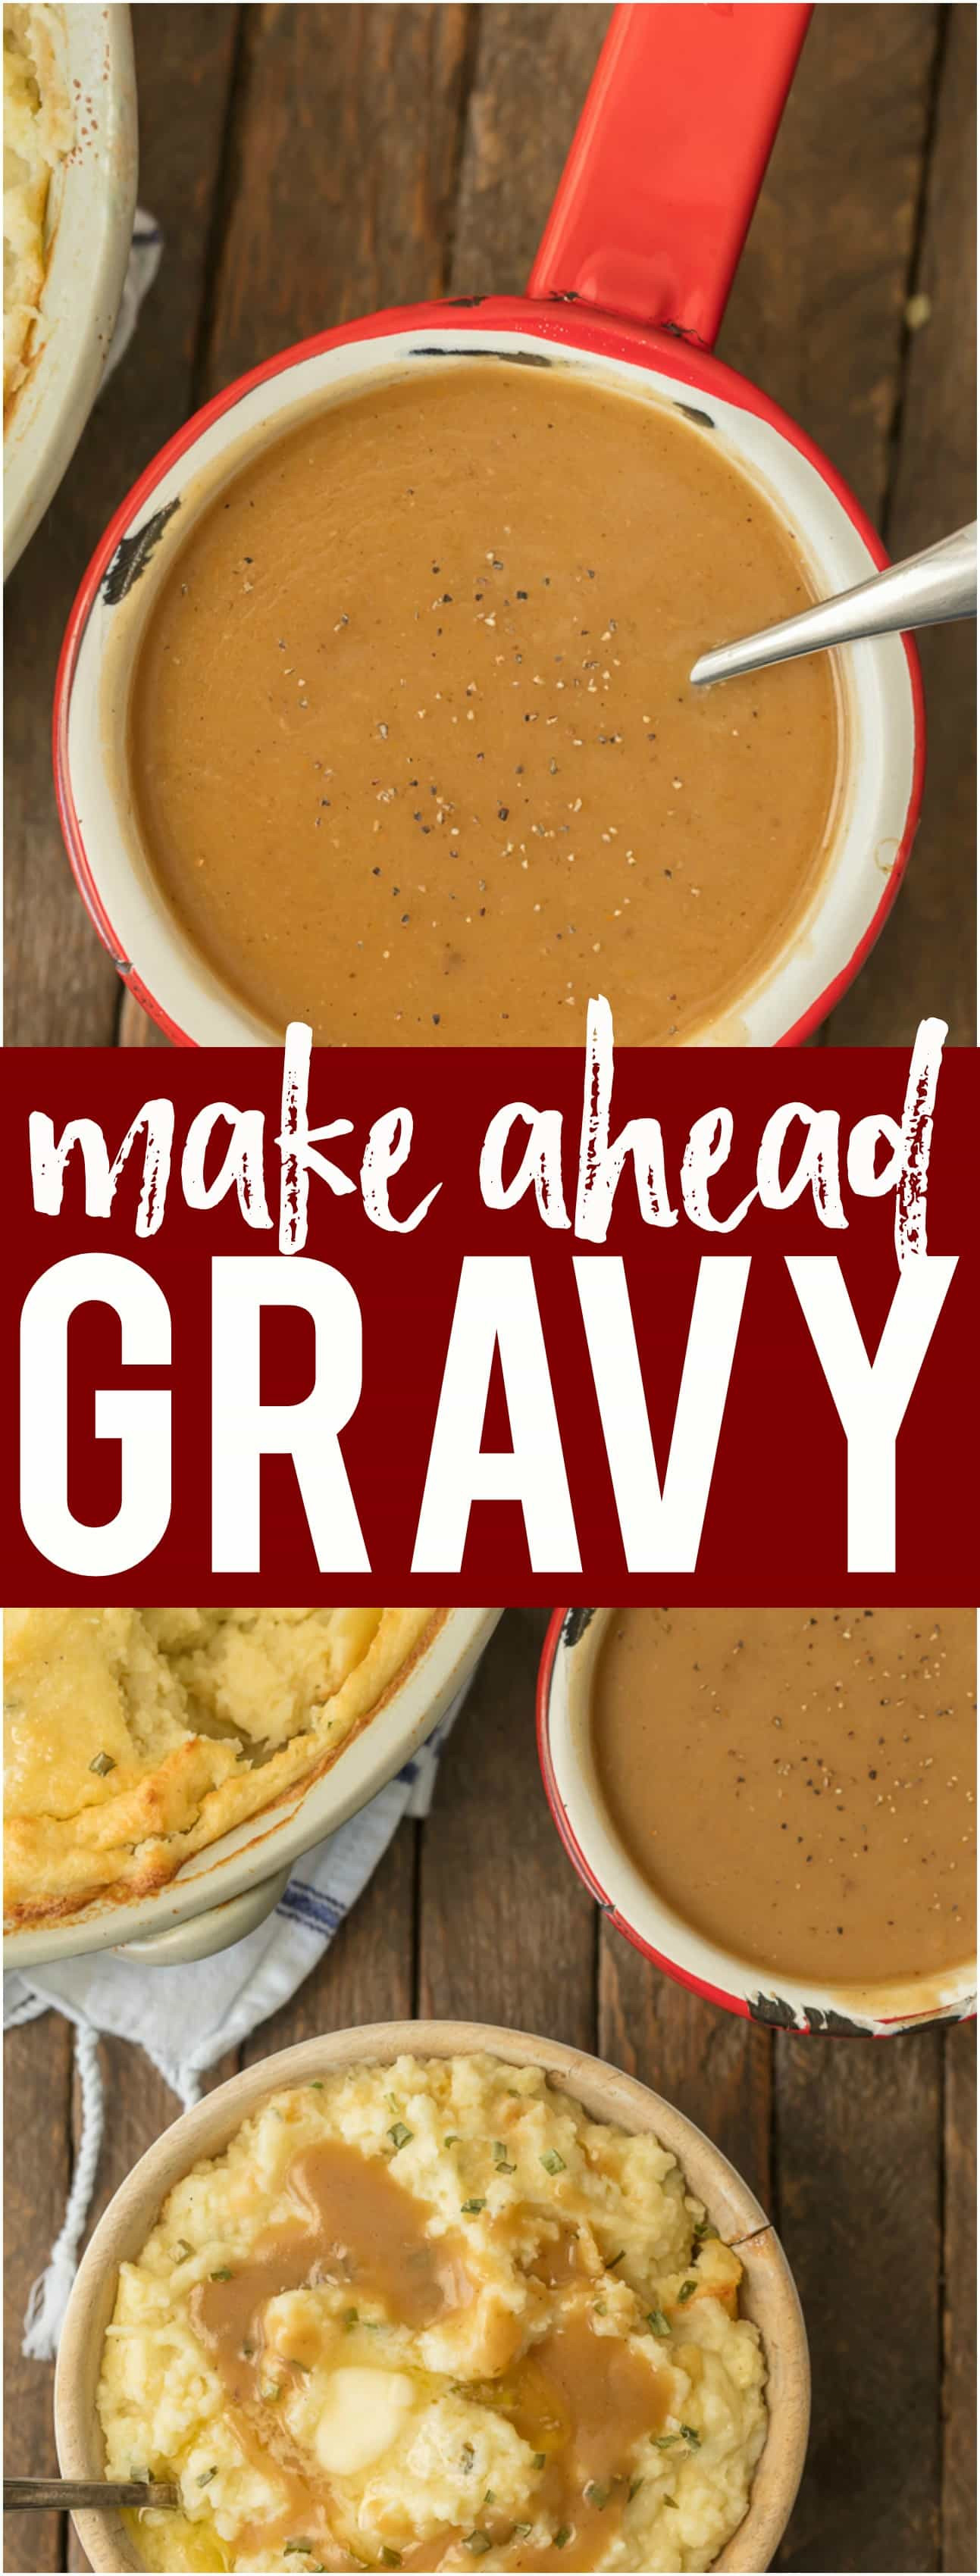 Make Ahead Gravy For Thanksgiving
 Make Ahead Gravy The Cookie Rookie